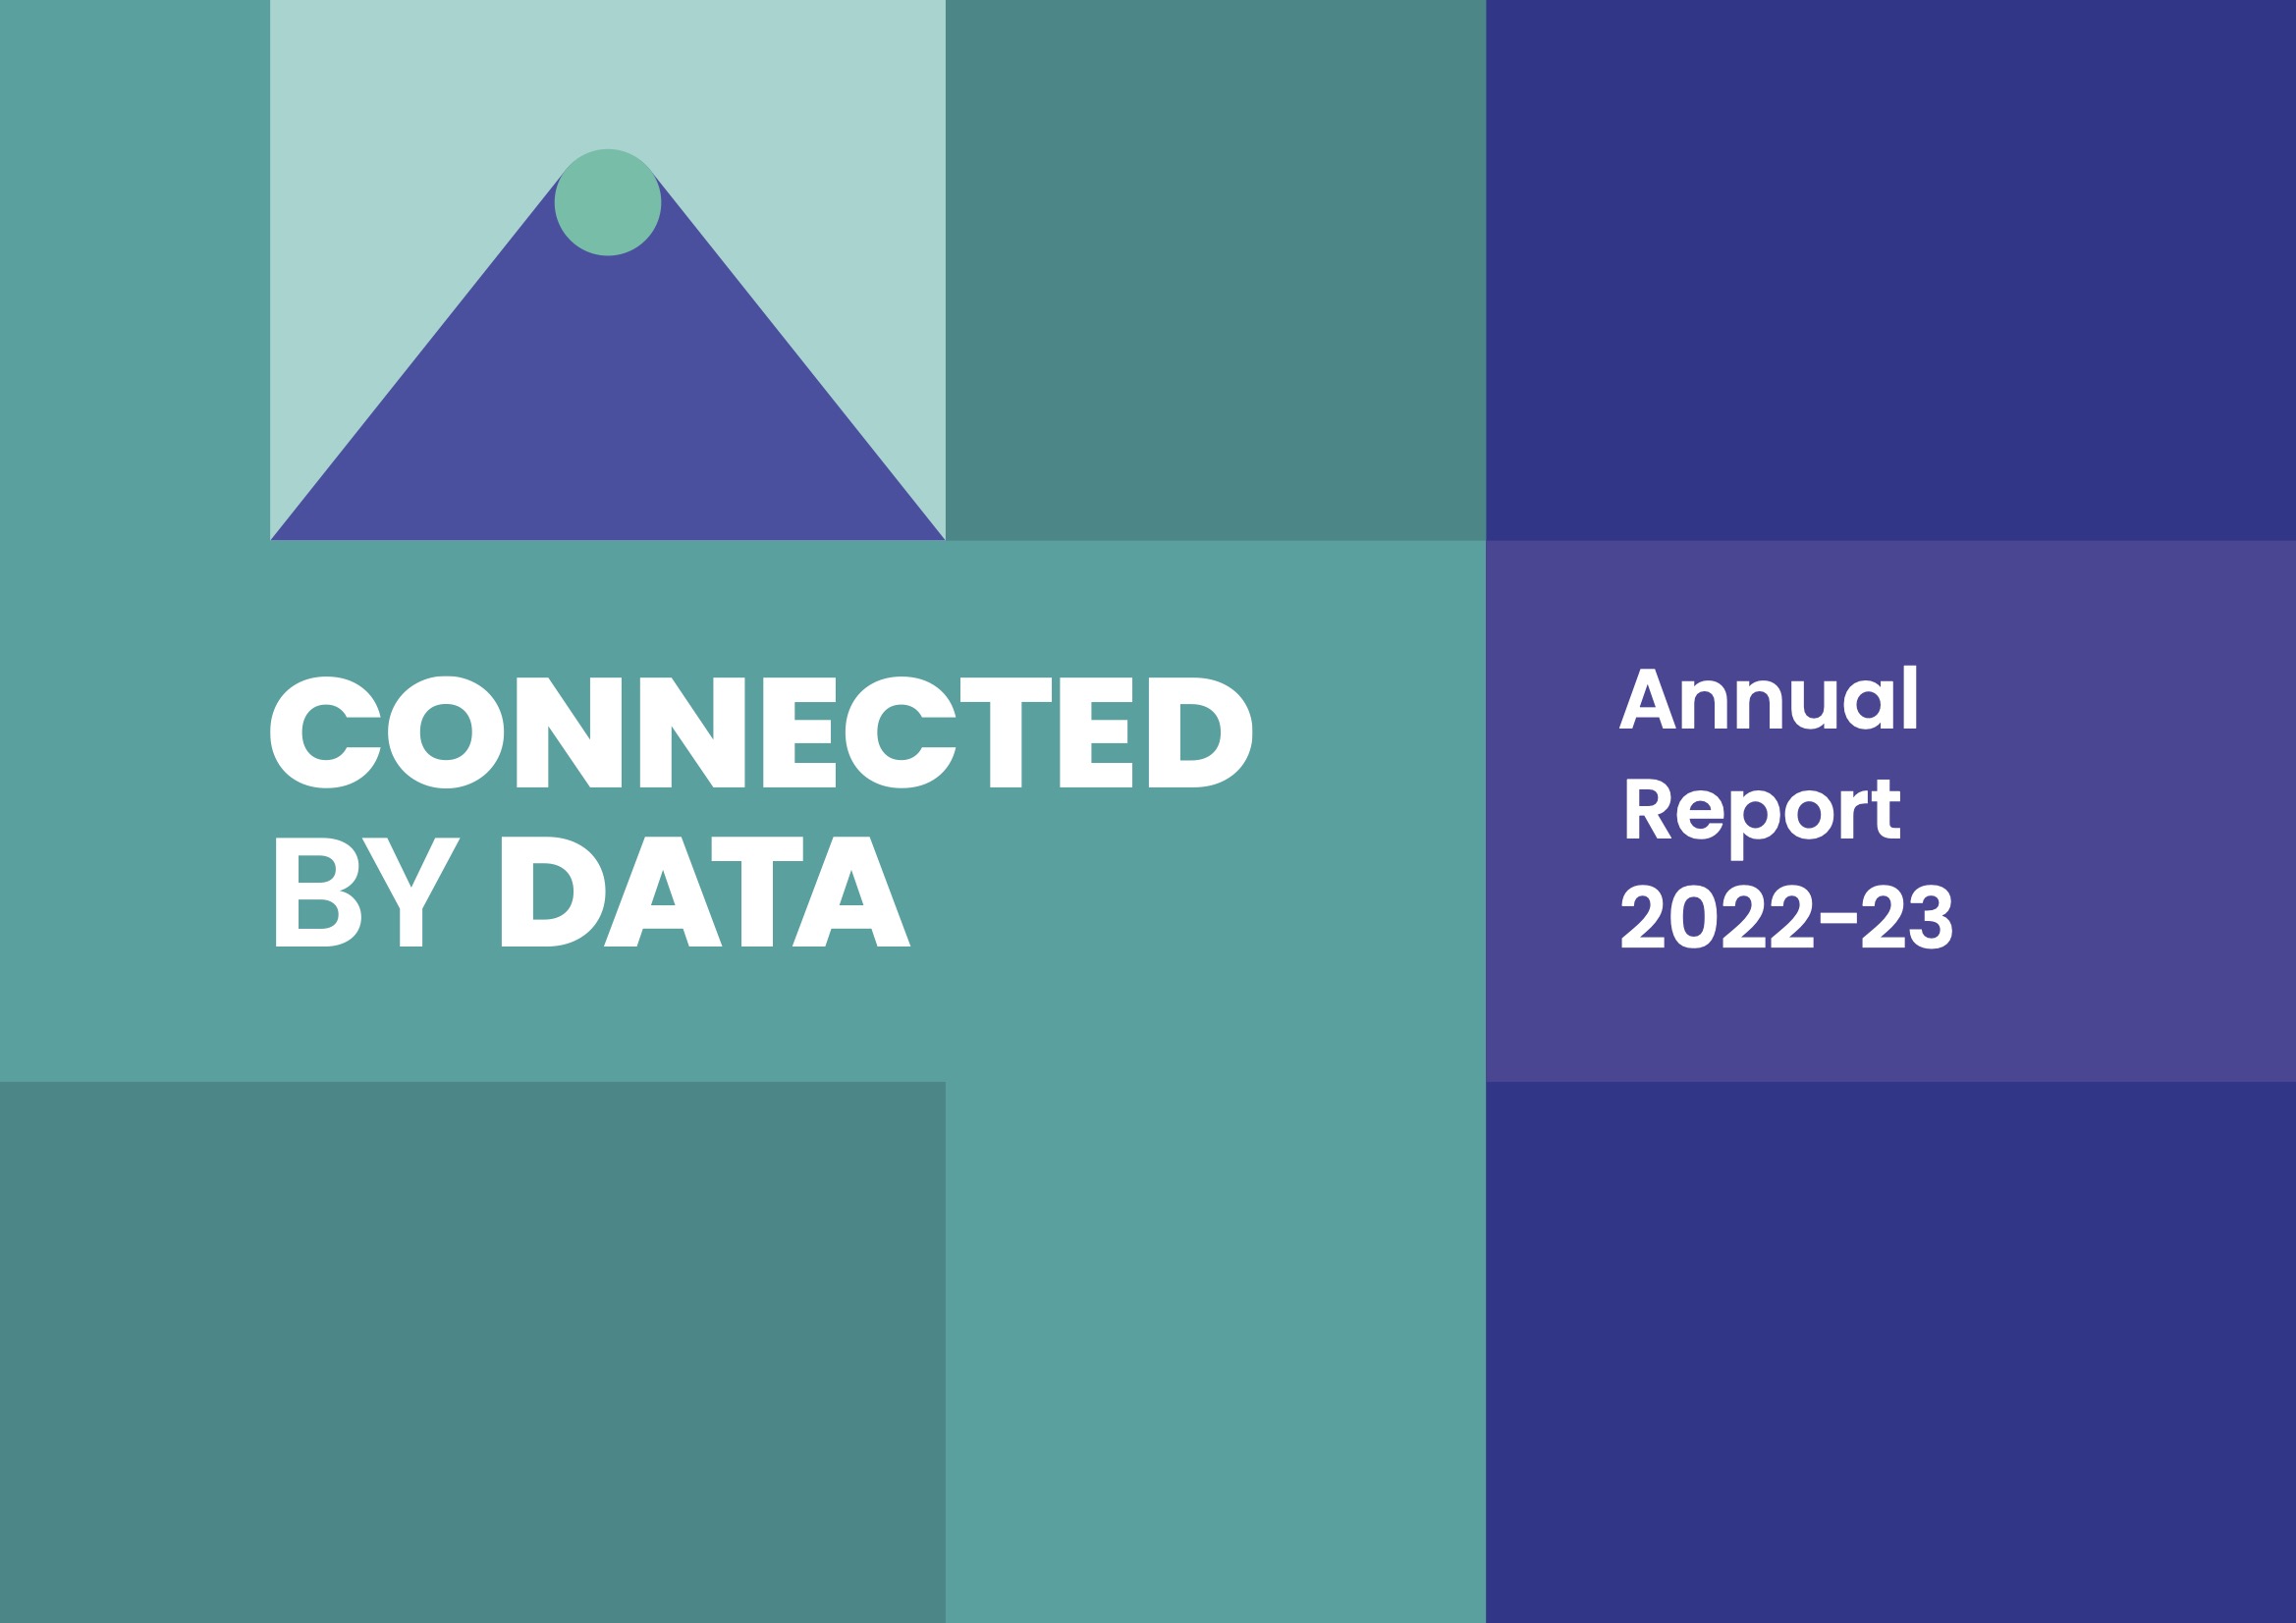 Connected by Data Annual Report 2022-2023